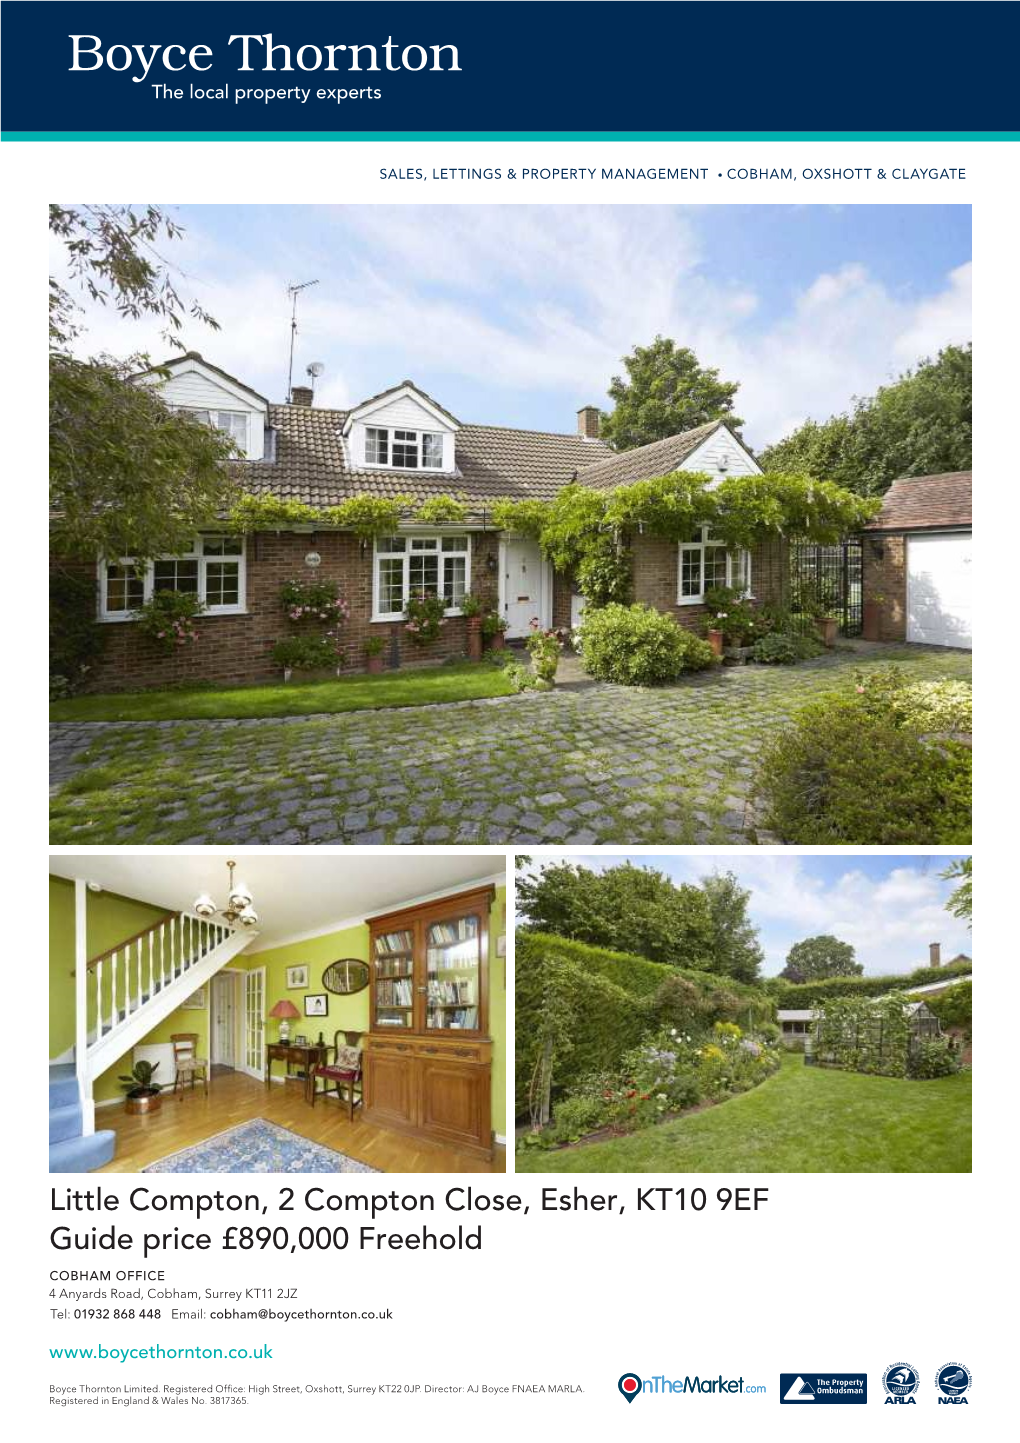 Little Compton, 2 Compton Close, Esher, KT10 9EF Guide Price £890,000 Freehold